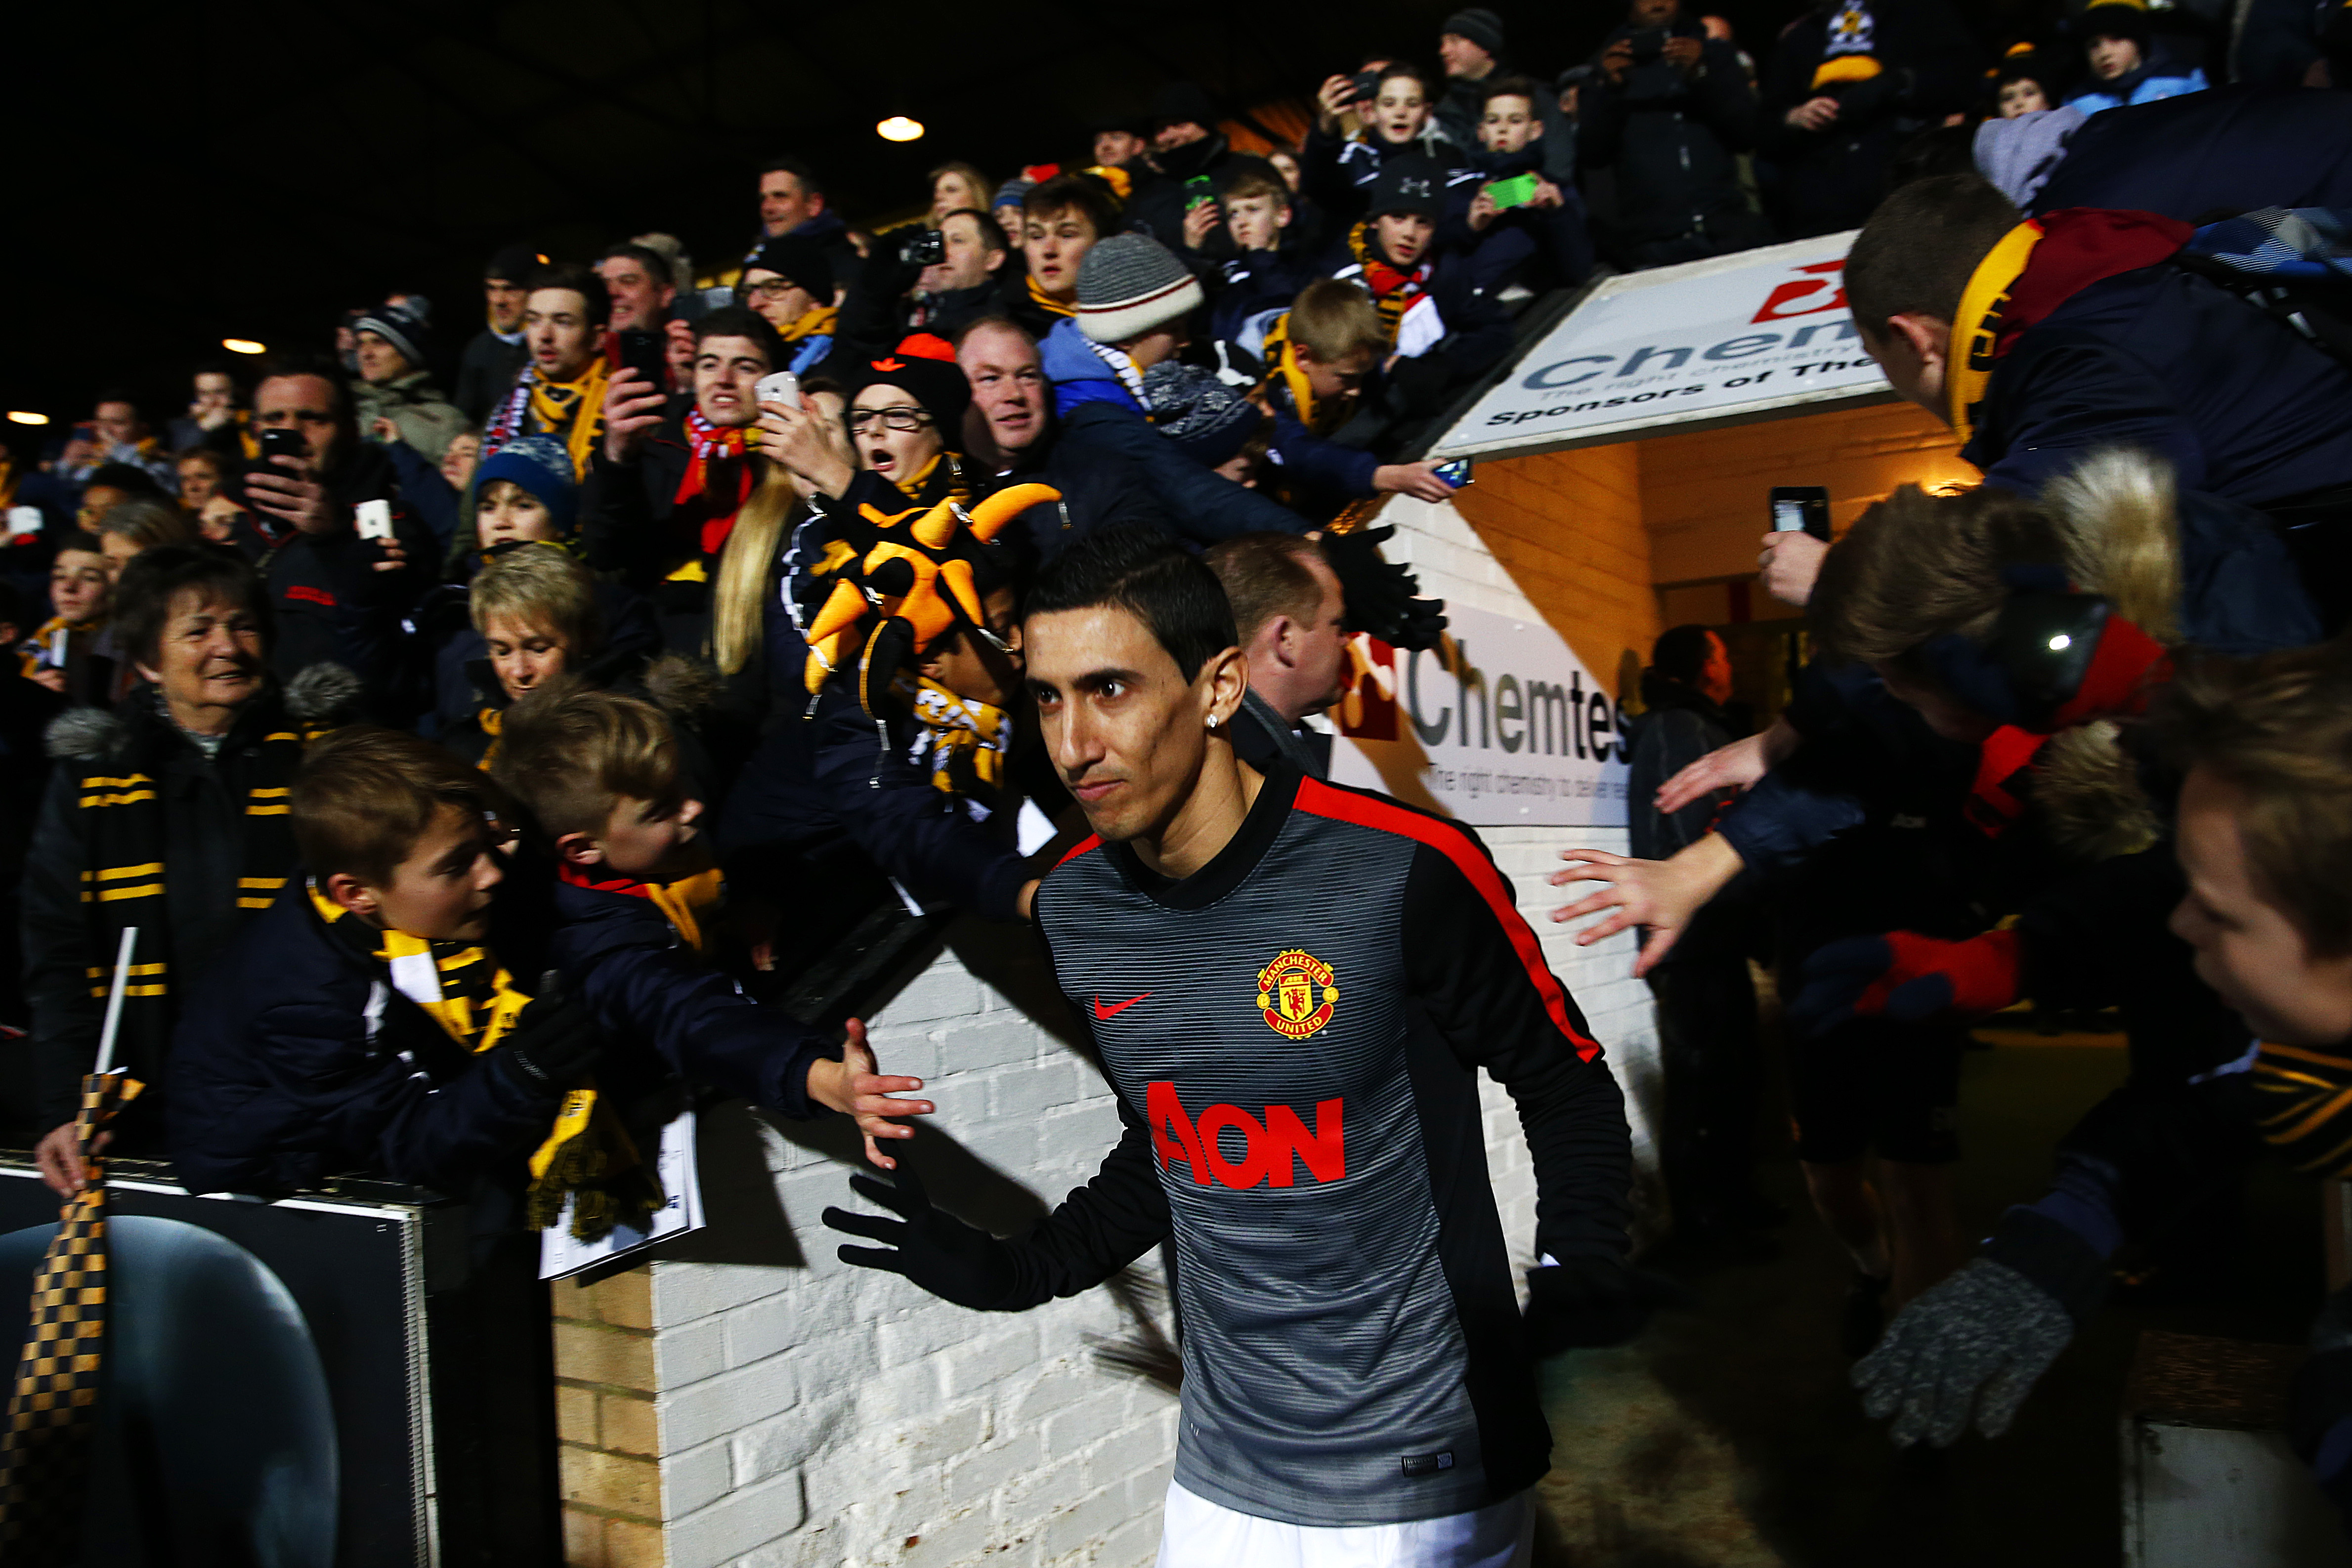 CAMBRIDGE, ENGLAND - JANUARY 23: Angel di Maria of Manchester United walks out for the warm-up before the FA Cup Fourth Round match between Cambridge United and Manchester United at The R Costings Abbey Stadium on January 23, 2015 in Cambridge, England. (Photo by Julian Finney/Getty Images)